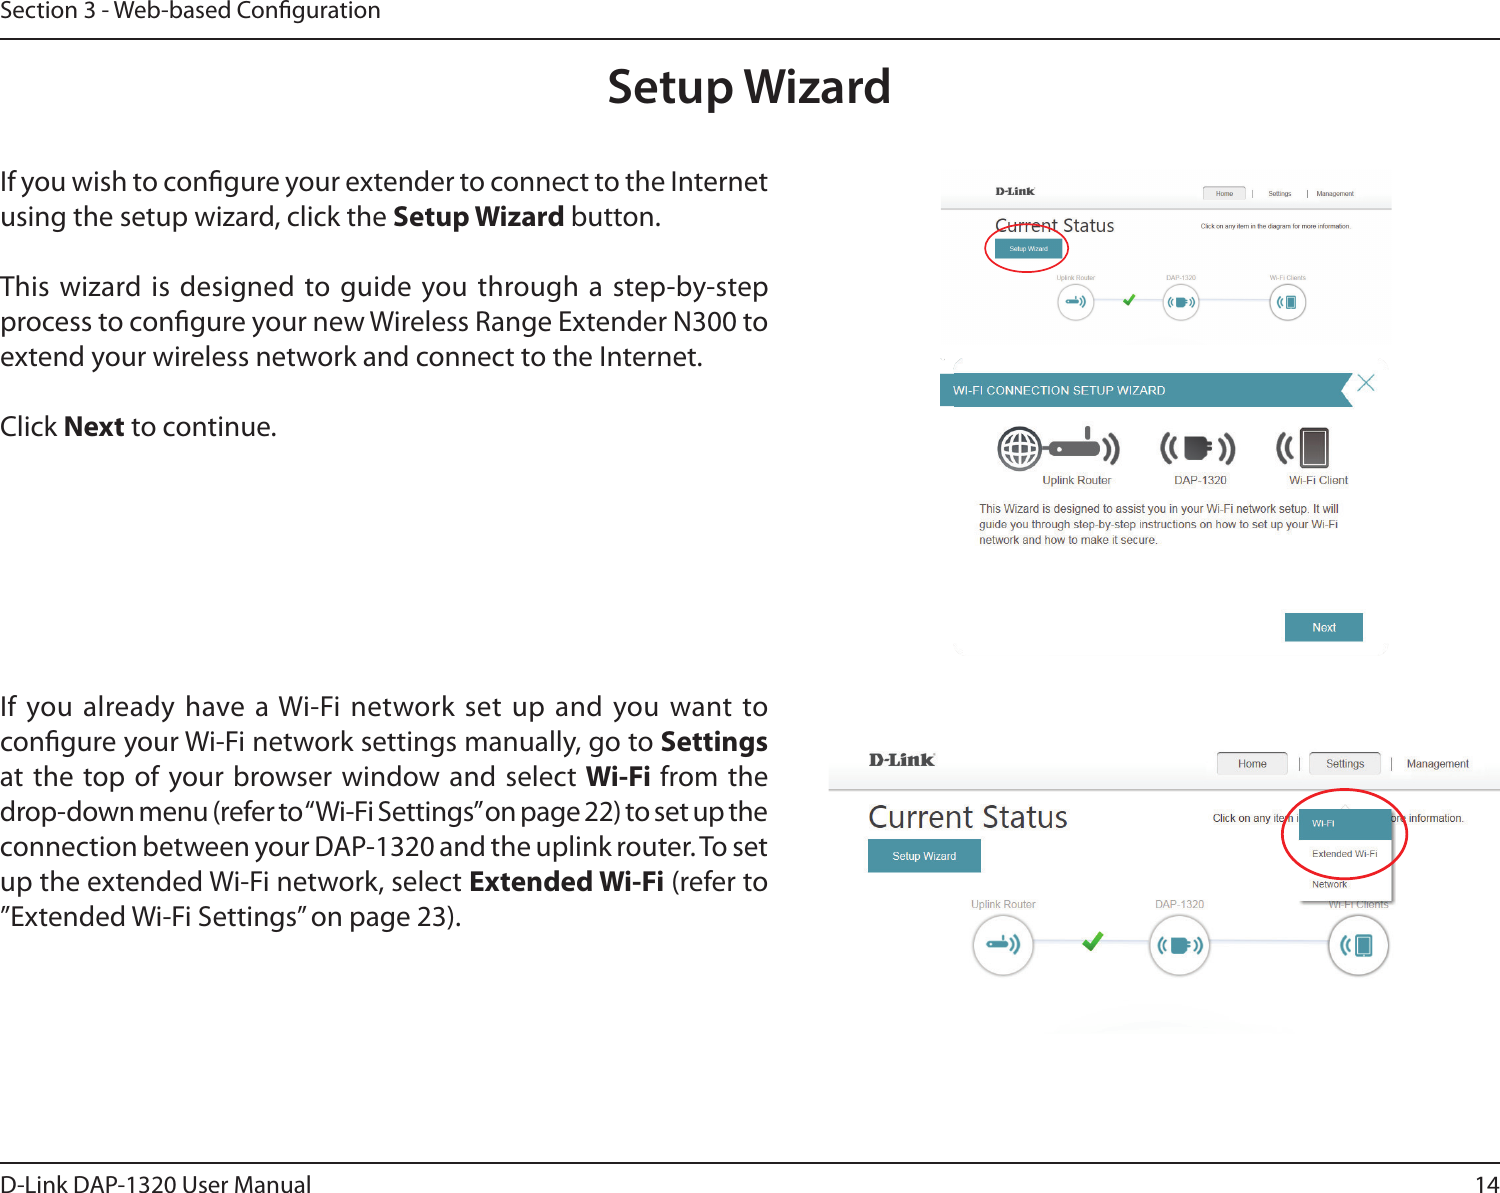 14D-Link DAP-1320 User ManualSection 3 - Web-based CongurationSetup WizardIf you wish to congure your extender to connect to the Internet using the setup wizard, click the Setup Wizard button.This wizard is  designed to guide  you through a step-by-step process to congure your new Wireless Range Extender N300 to extend your wireless network and connect to the Internet.Click Next to continue. If you already have a Wi-Fi network set up and  you want to congure your Wi-Fi network settings manually, go to Settings  at the top of your browser window and select Wi-Fi from the drop-down menu (refer to “Wi-Fi Settings” on page 22) to set up the connection between your DAP-1320 and the uplink router. To set up the extended Wi-Fi network, select Extended Wi-Fi (refer to ”Extended Wi-Fi Settings” on page 23).